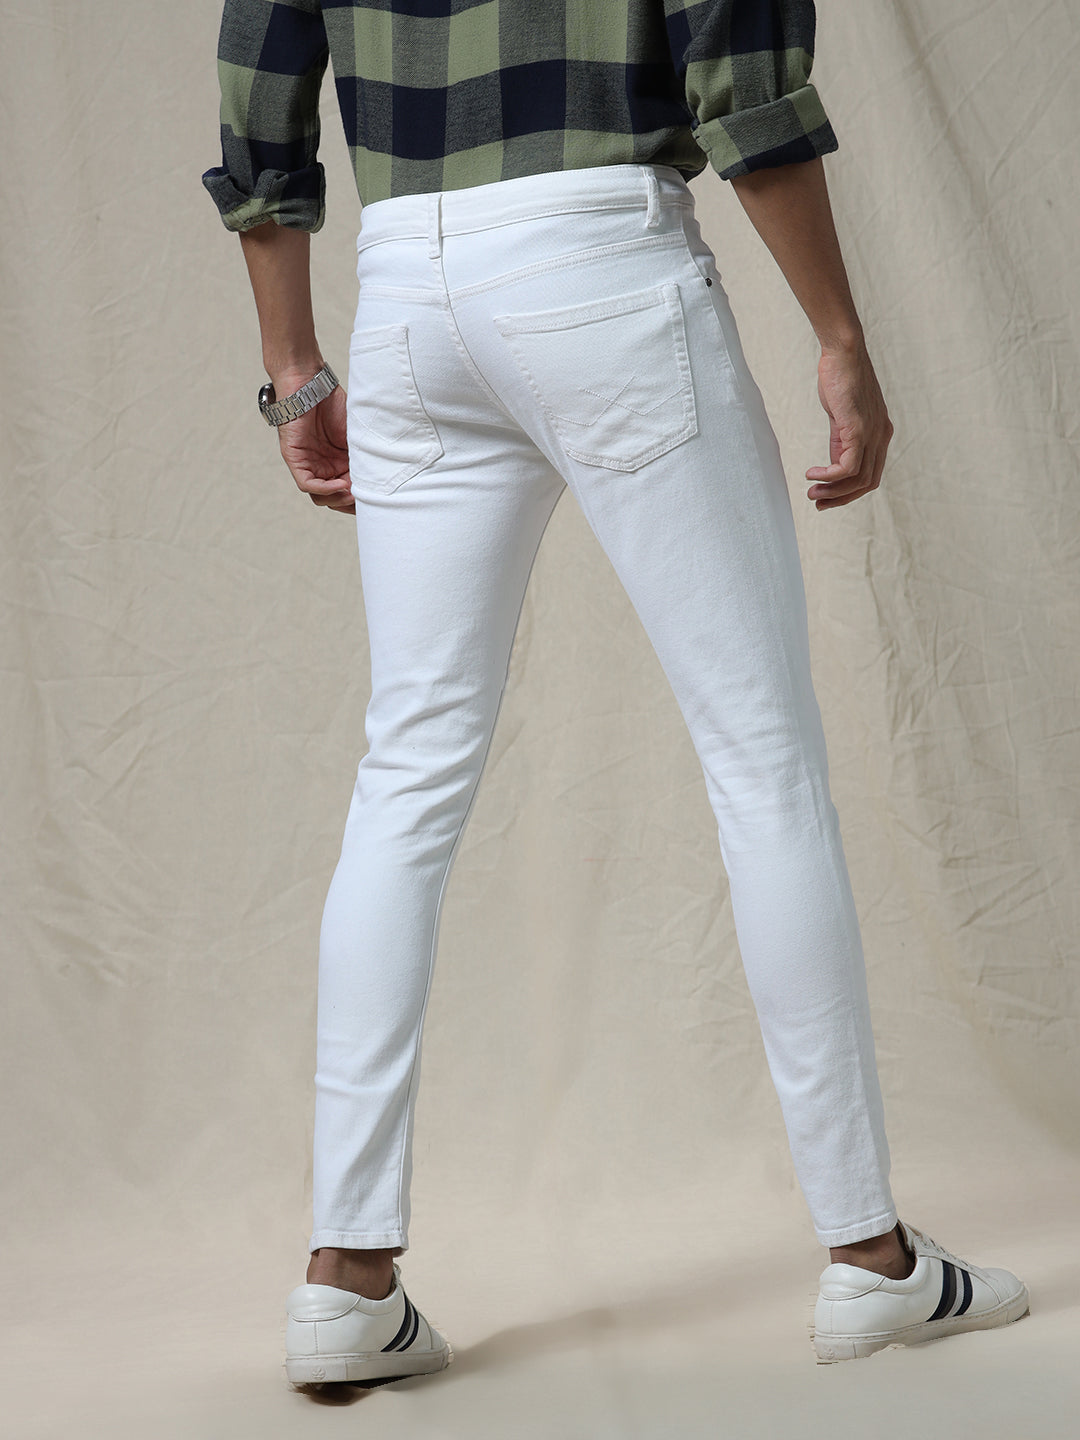 Buy VOI JEANS White Light Tone Cotton Blend Skinny Mens Jeans | Shoppers  Stop